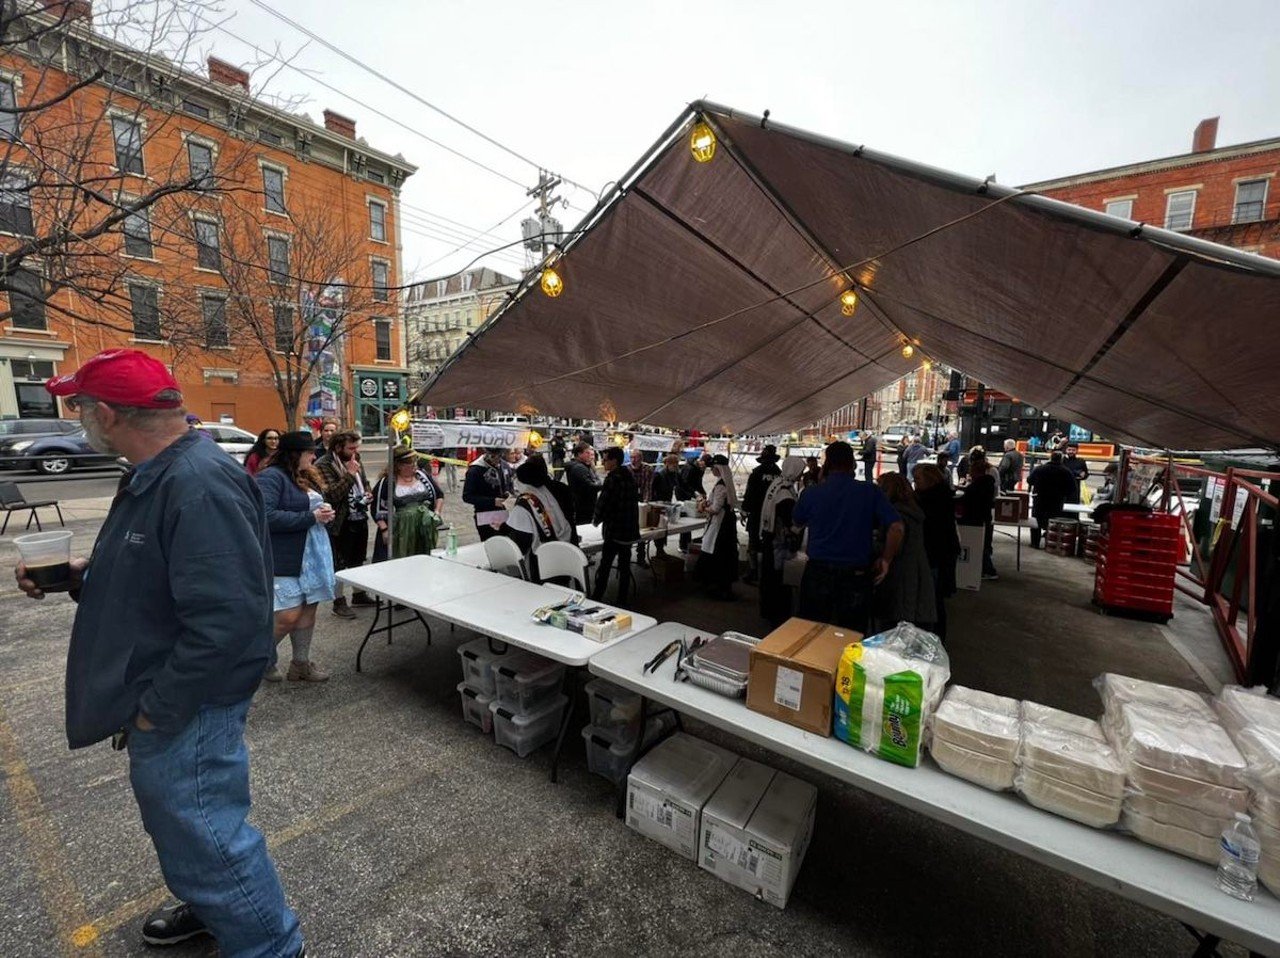 Old St. Mary’s Church
123 E. 13th St., Over-the-Rhine
Old St. Mary will hold its annual fish fry on March 1 along the Bockfest Parade route starting at 5 p.m.